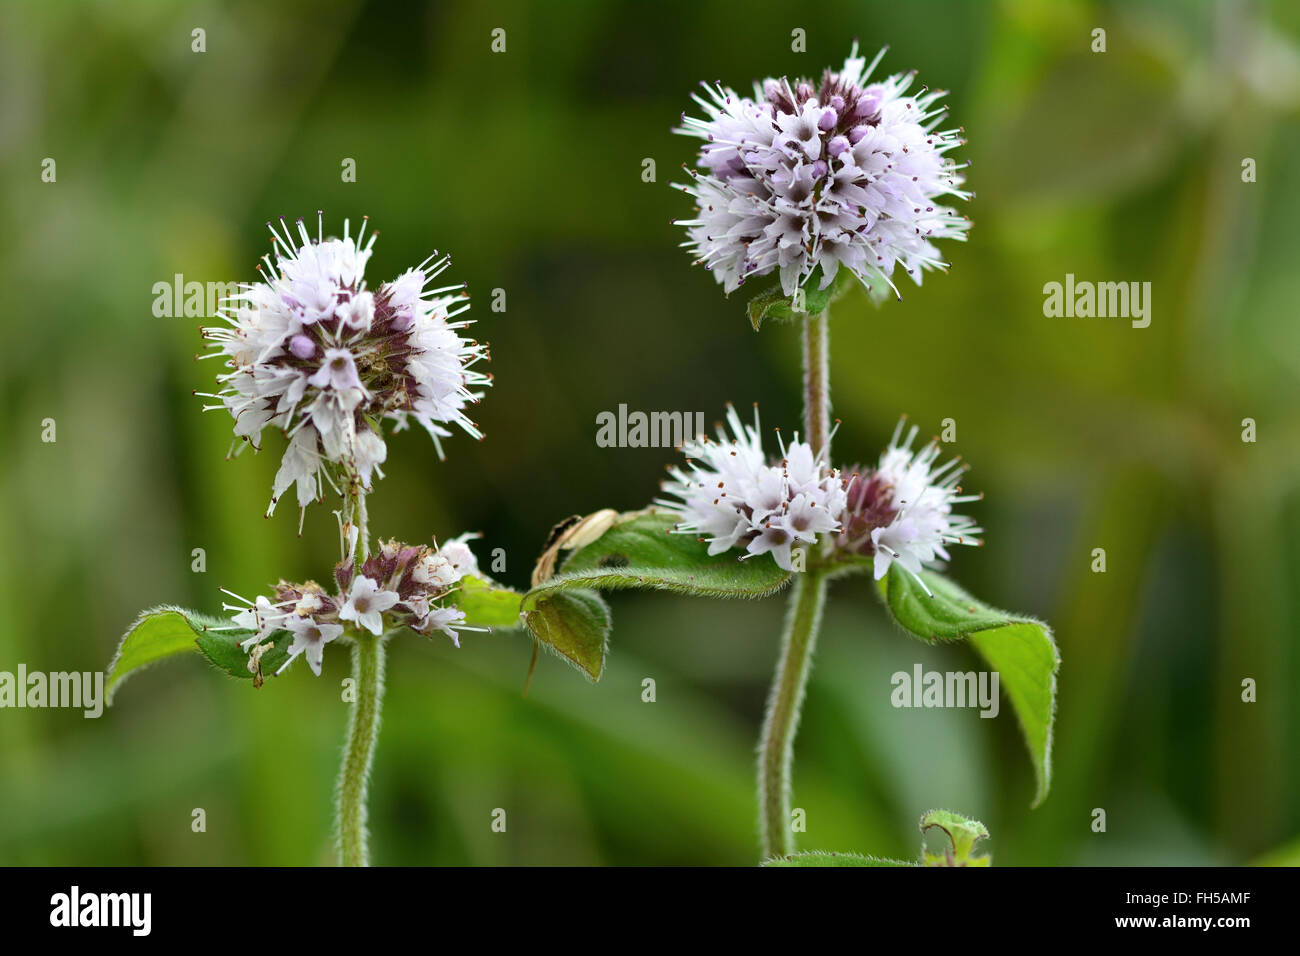 Water mint (Mentha aquatica). A plant of wet conditions with pale purple flowers in the Lamiaceae family Stock Photo